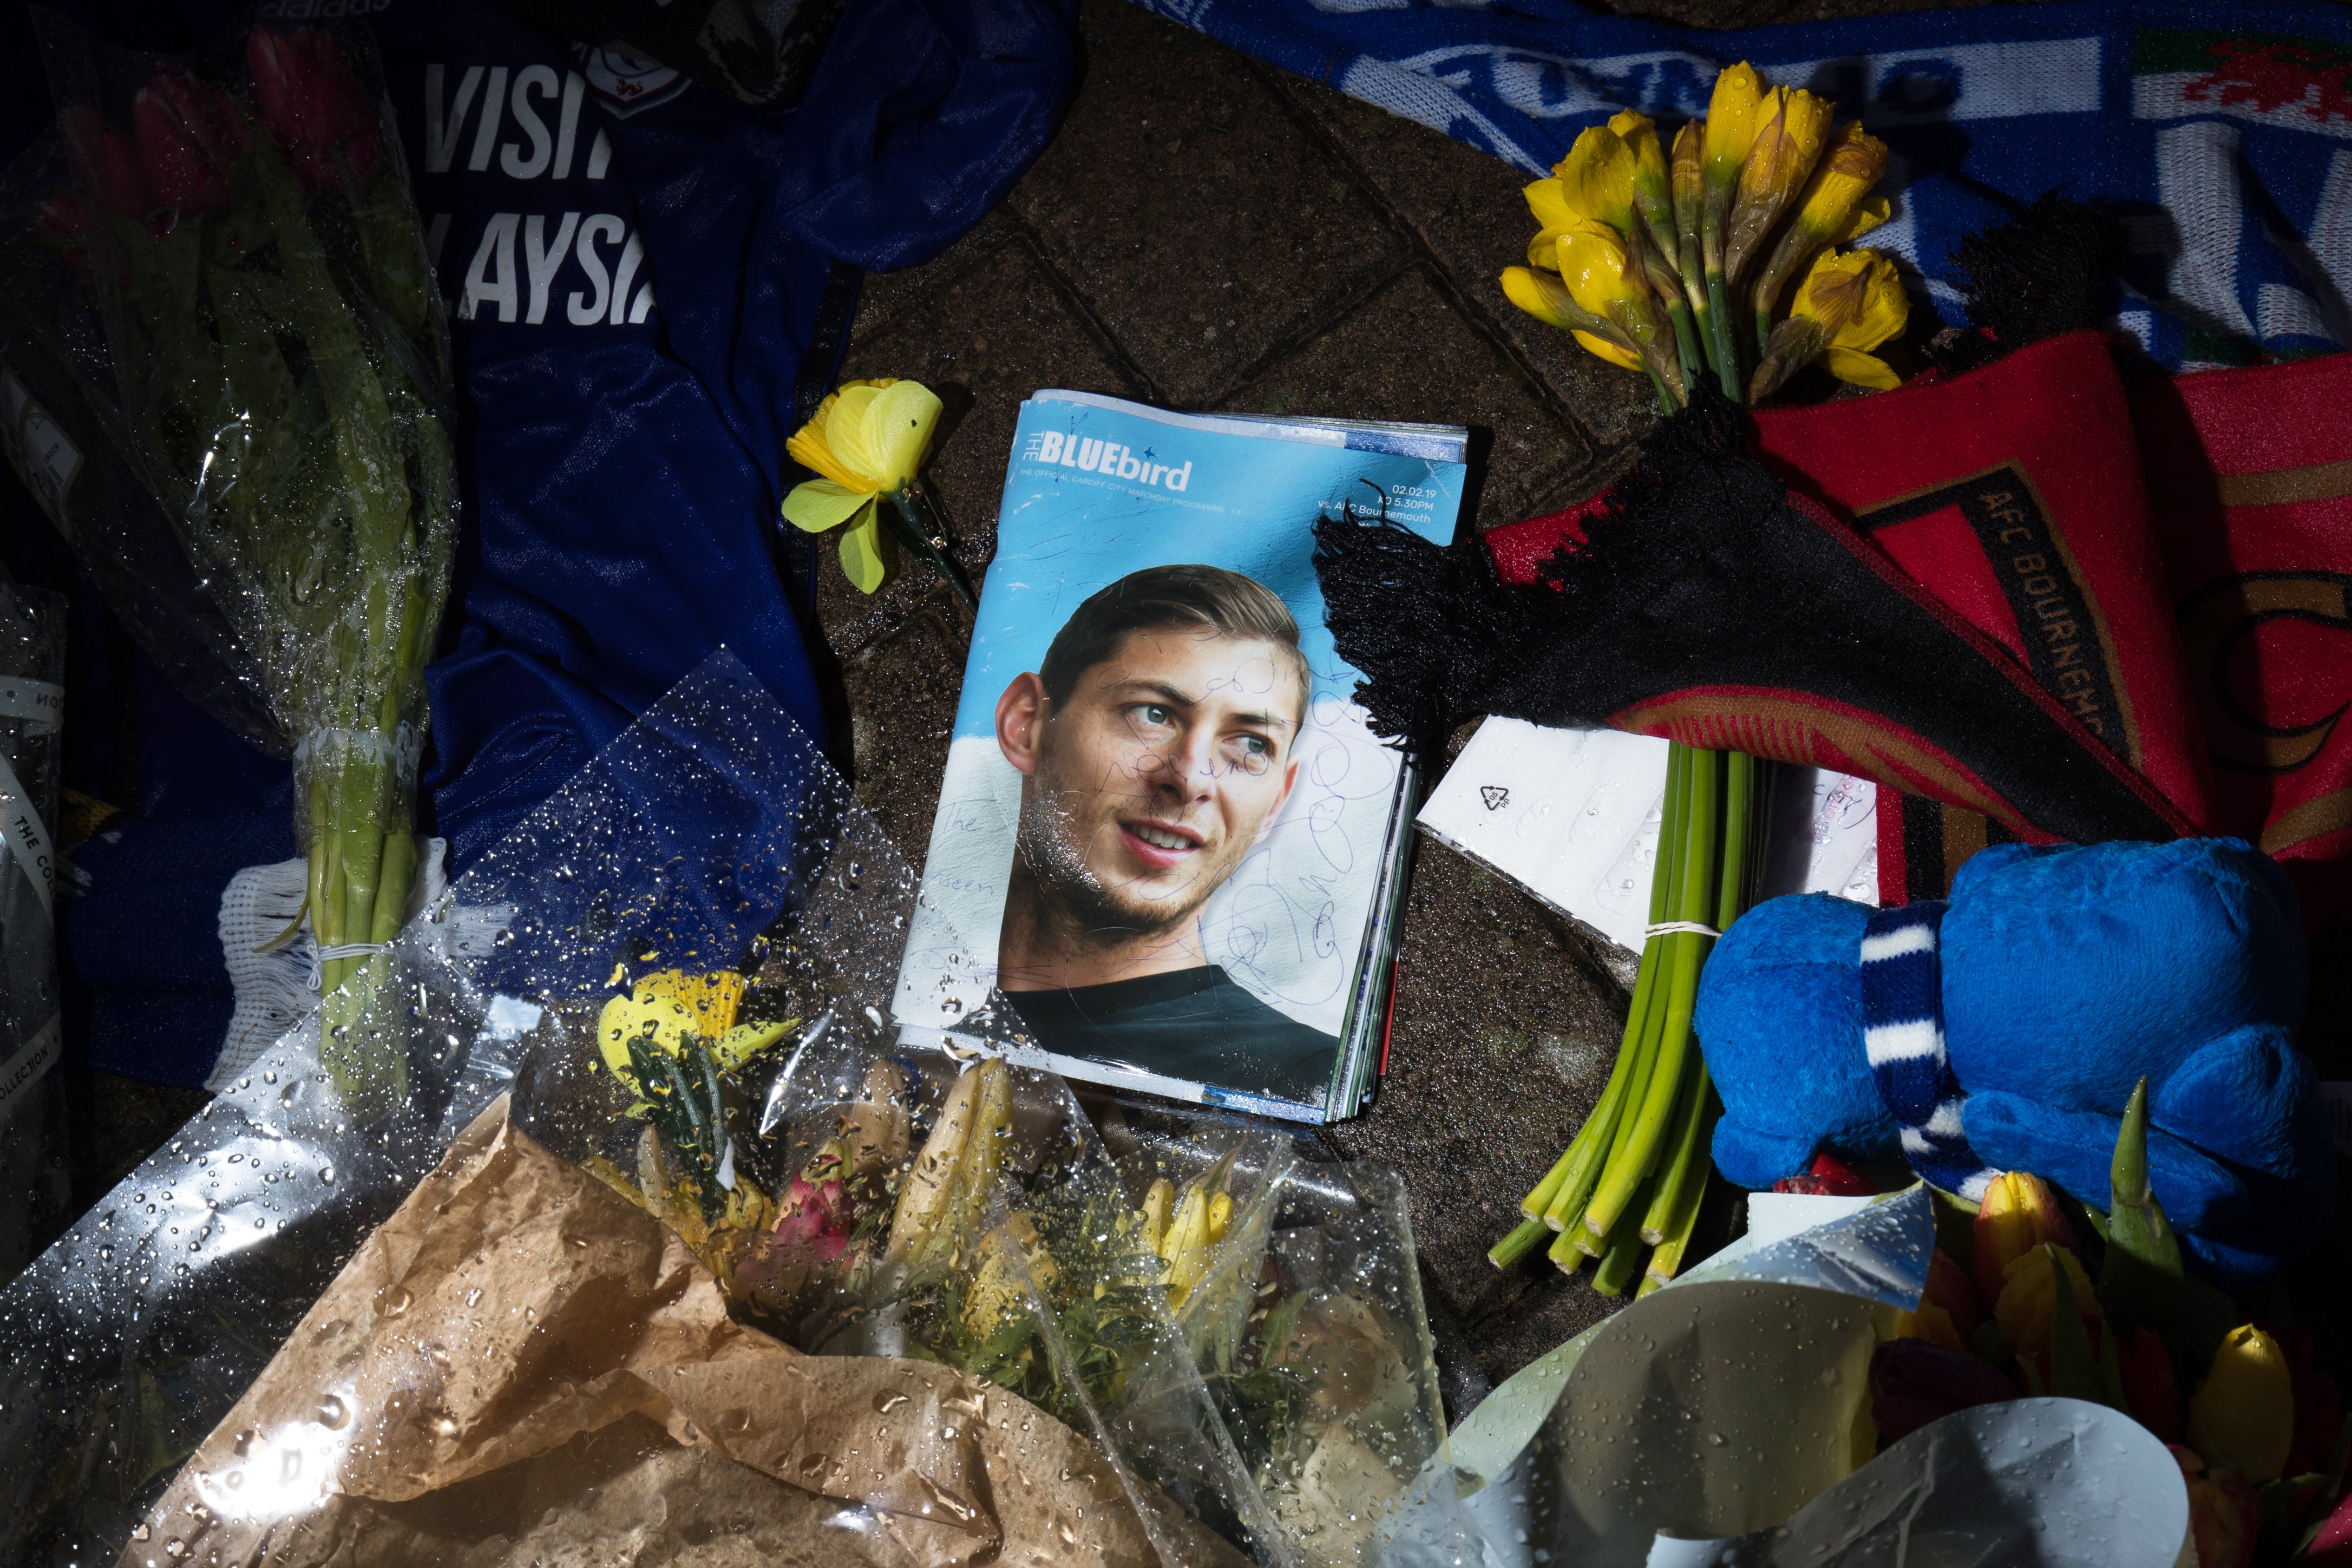 Tributes were left to Emiliano Sala outside Cardiff City’s stadium (Aaron Chown/PA)